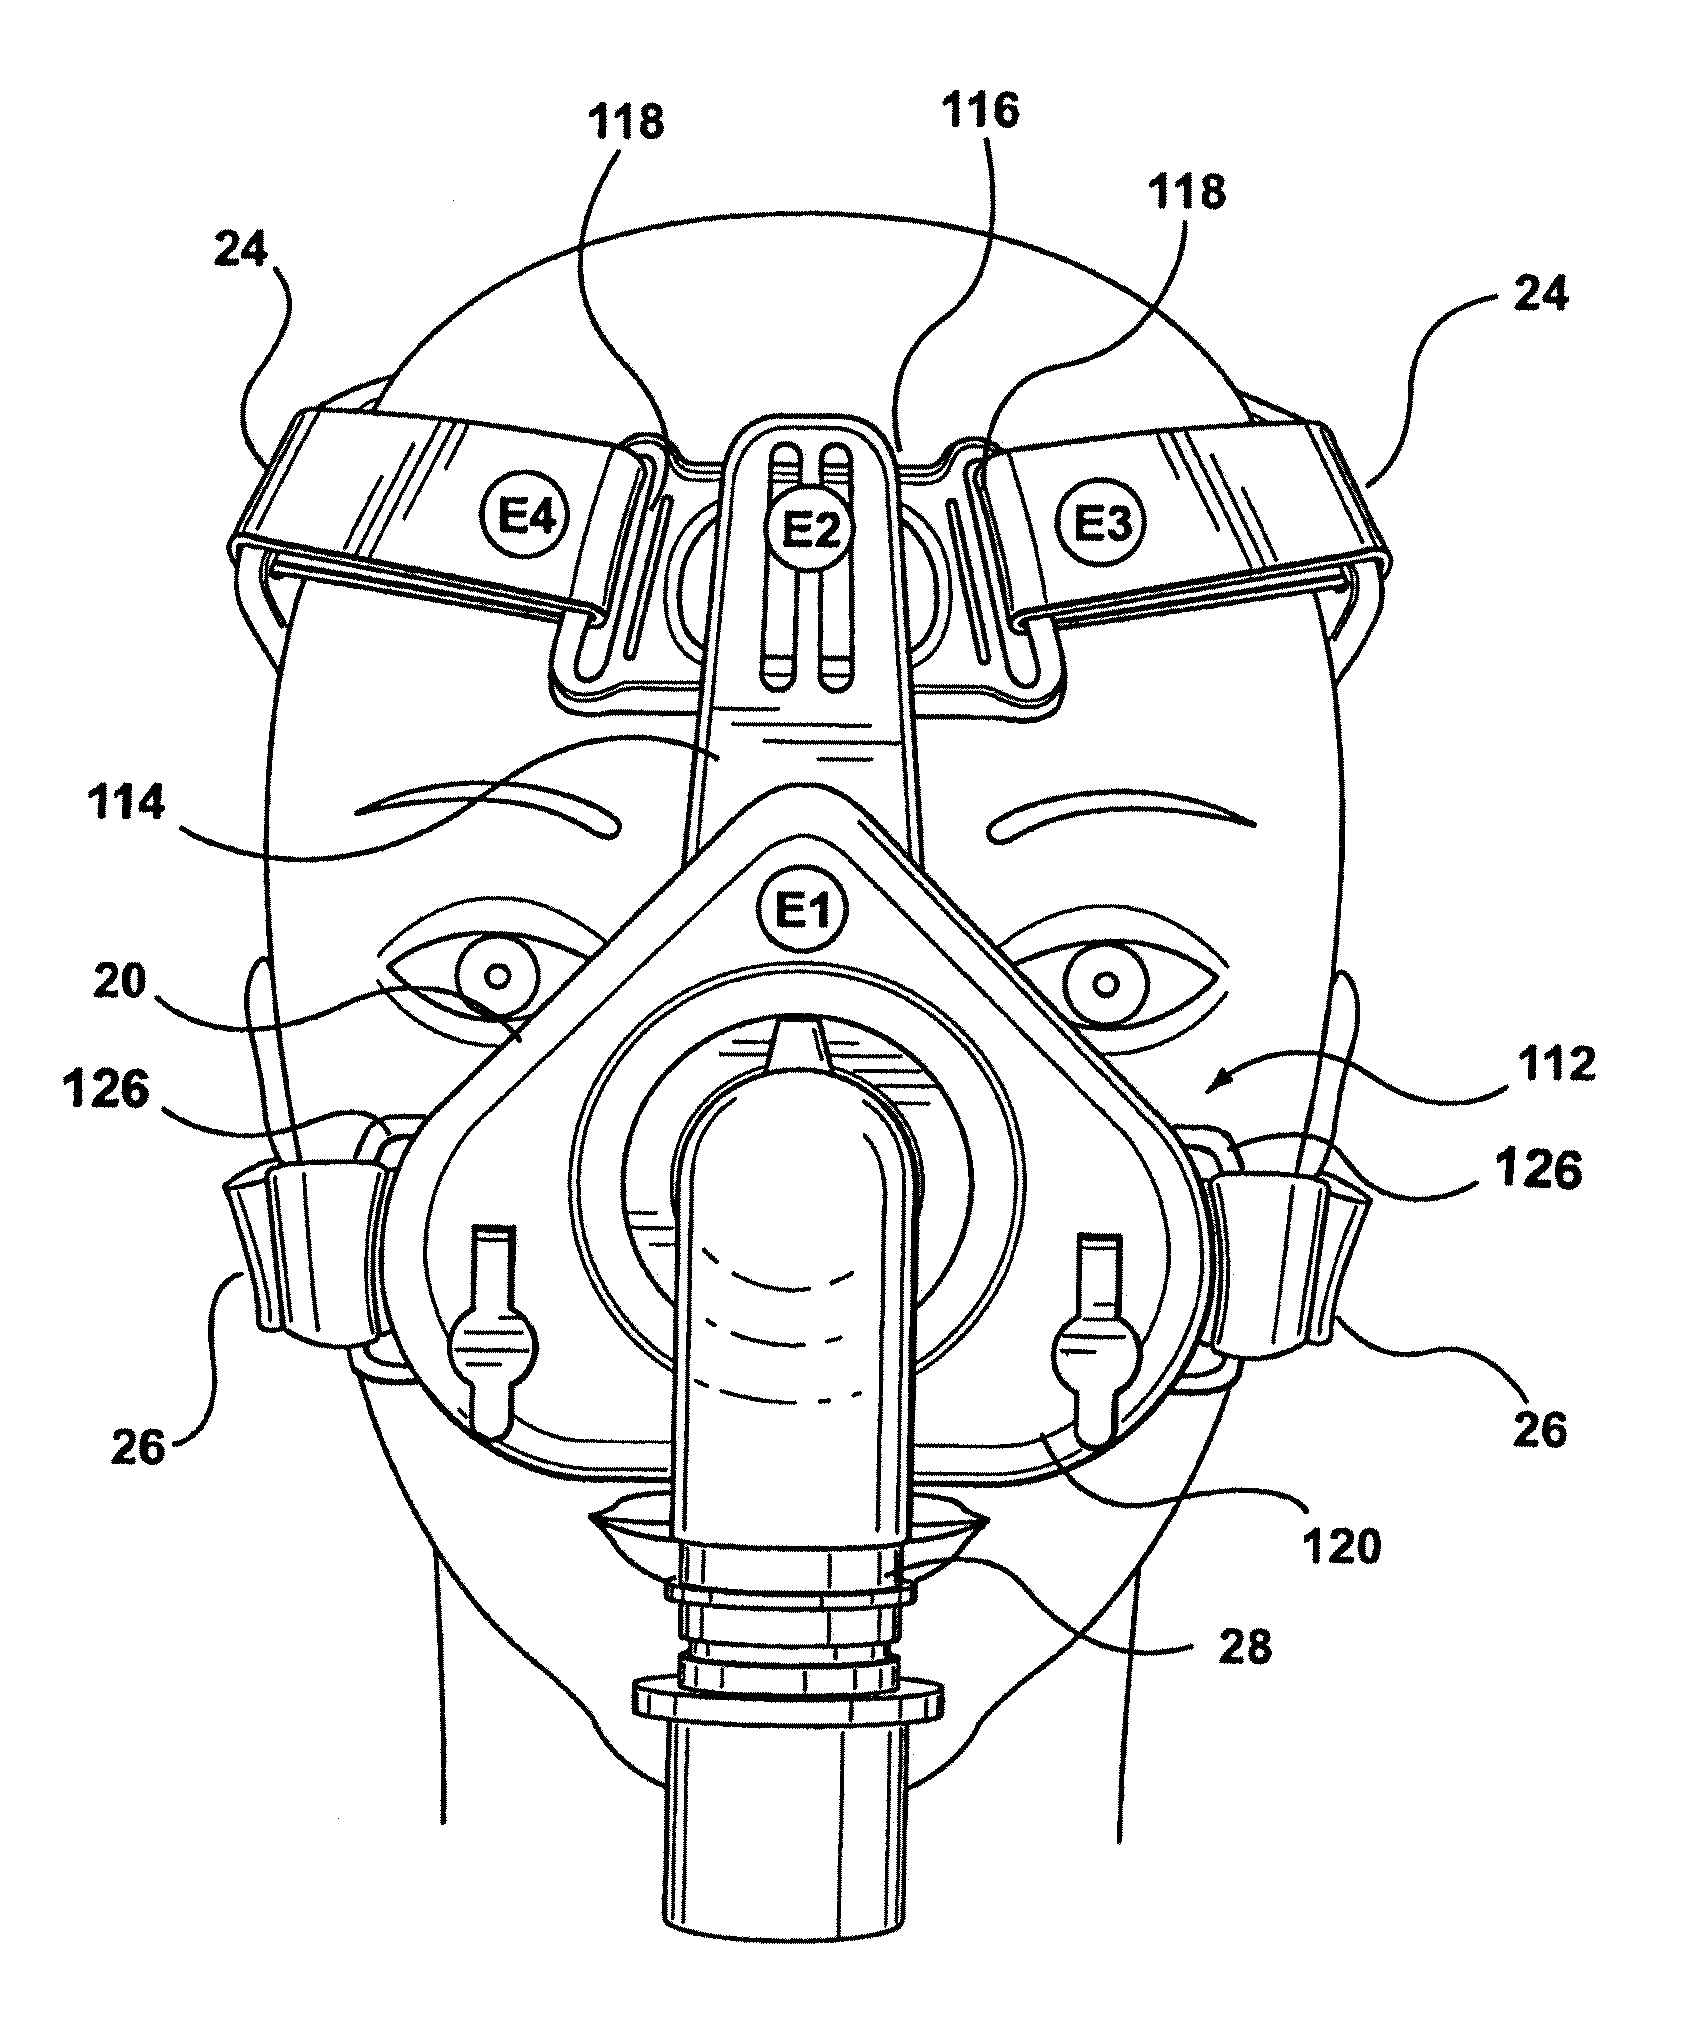 Mask assembly with integrated sensors